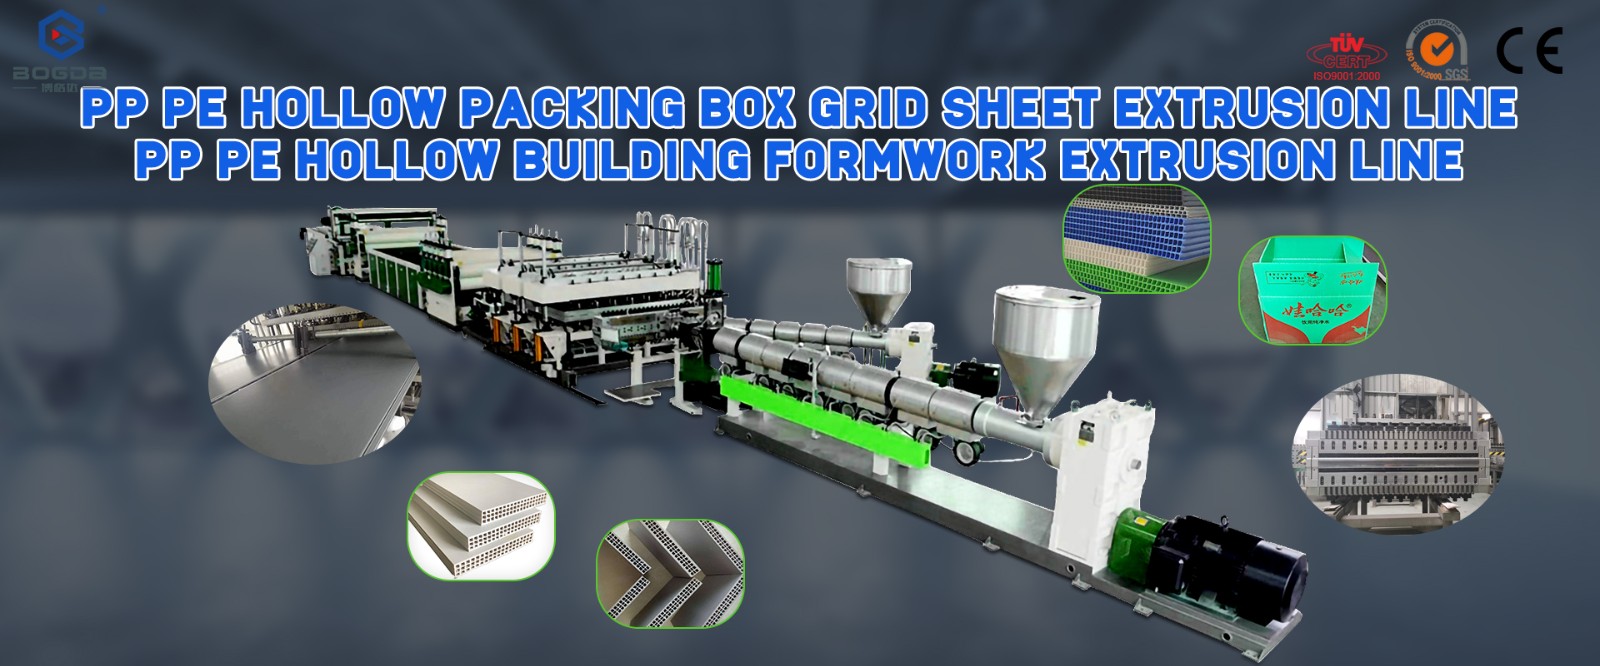 PP PE Hollow Packing Box Grid Sheet Extrusion Line PP PE Hollow Building Formwork Extrusion Line